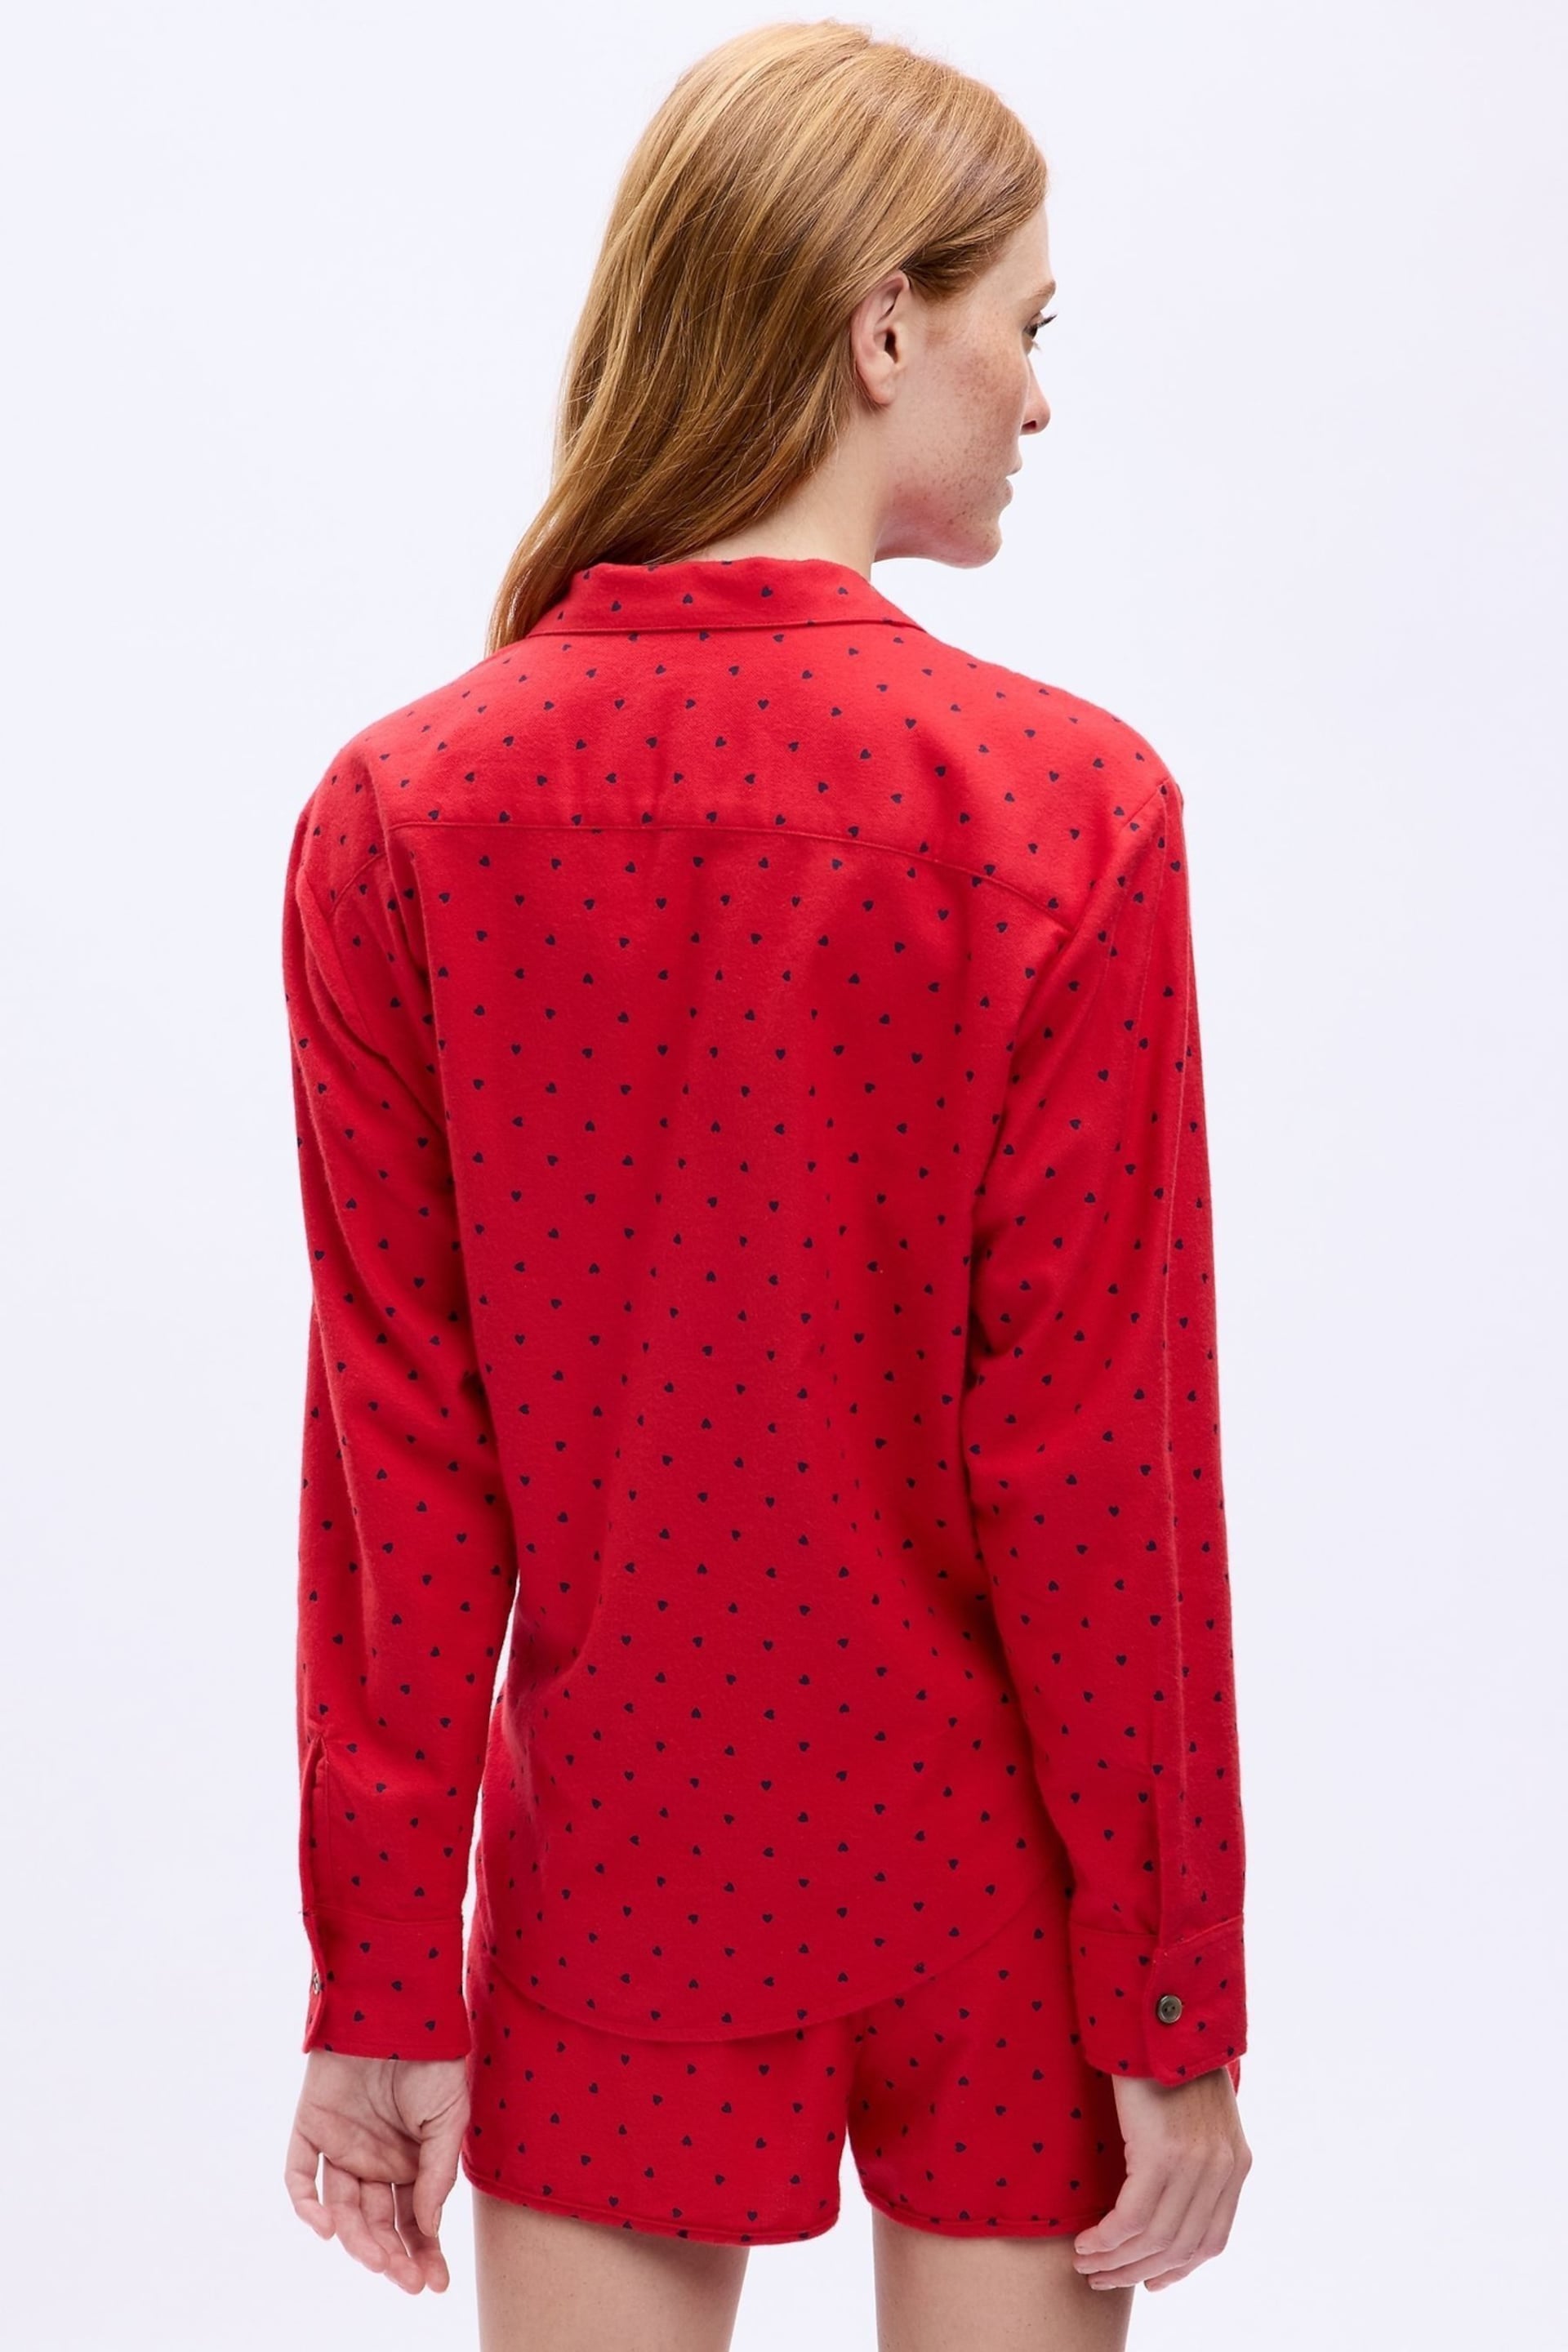 Gap Red Relaxed Flannel Long Sleeve Pyjama Shirt - Image 2 of 4